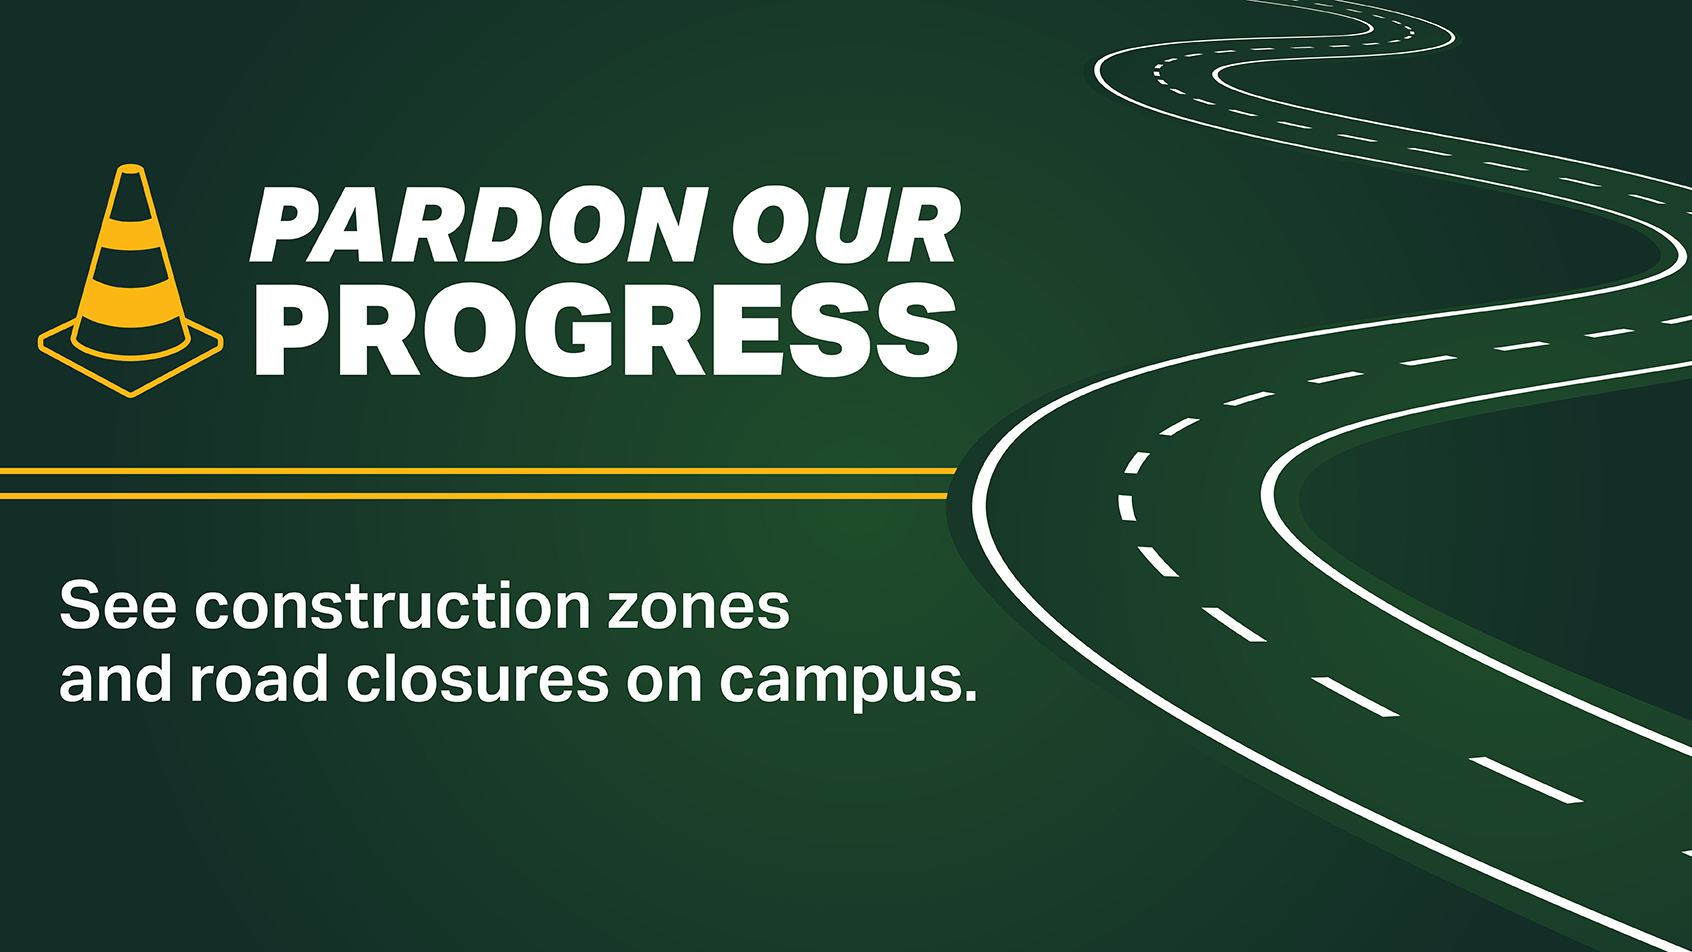 Pardon our progress: See construction zones and road closures on campus.